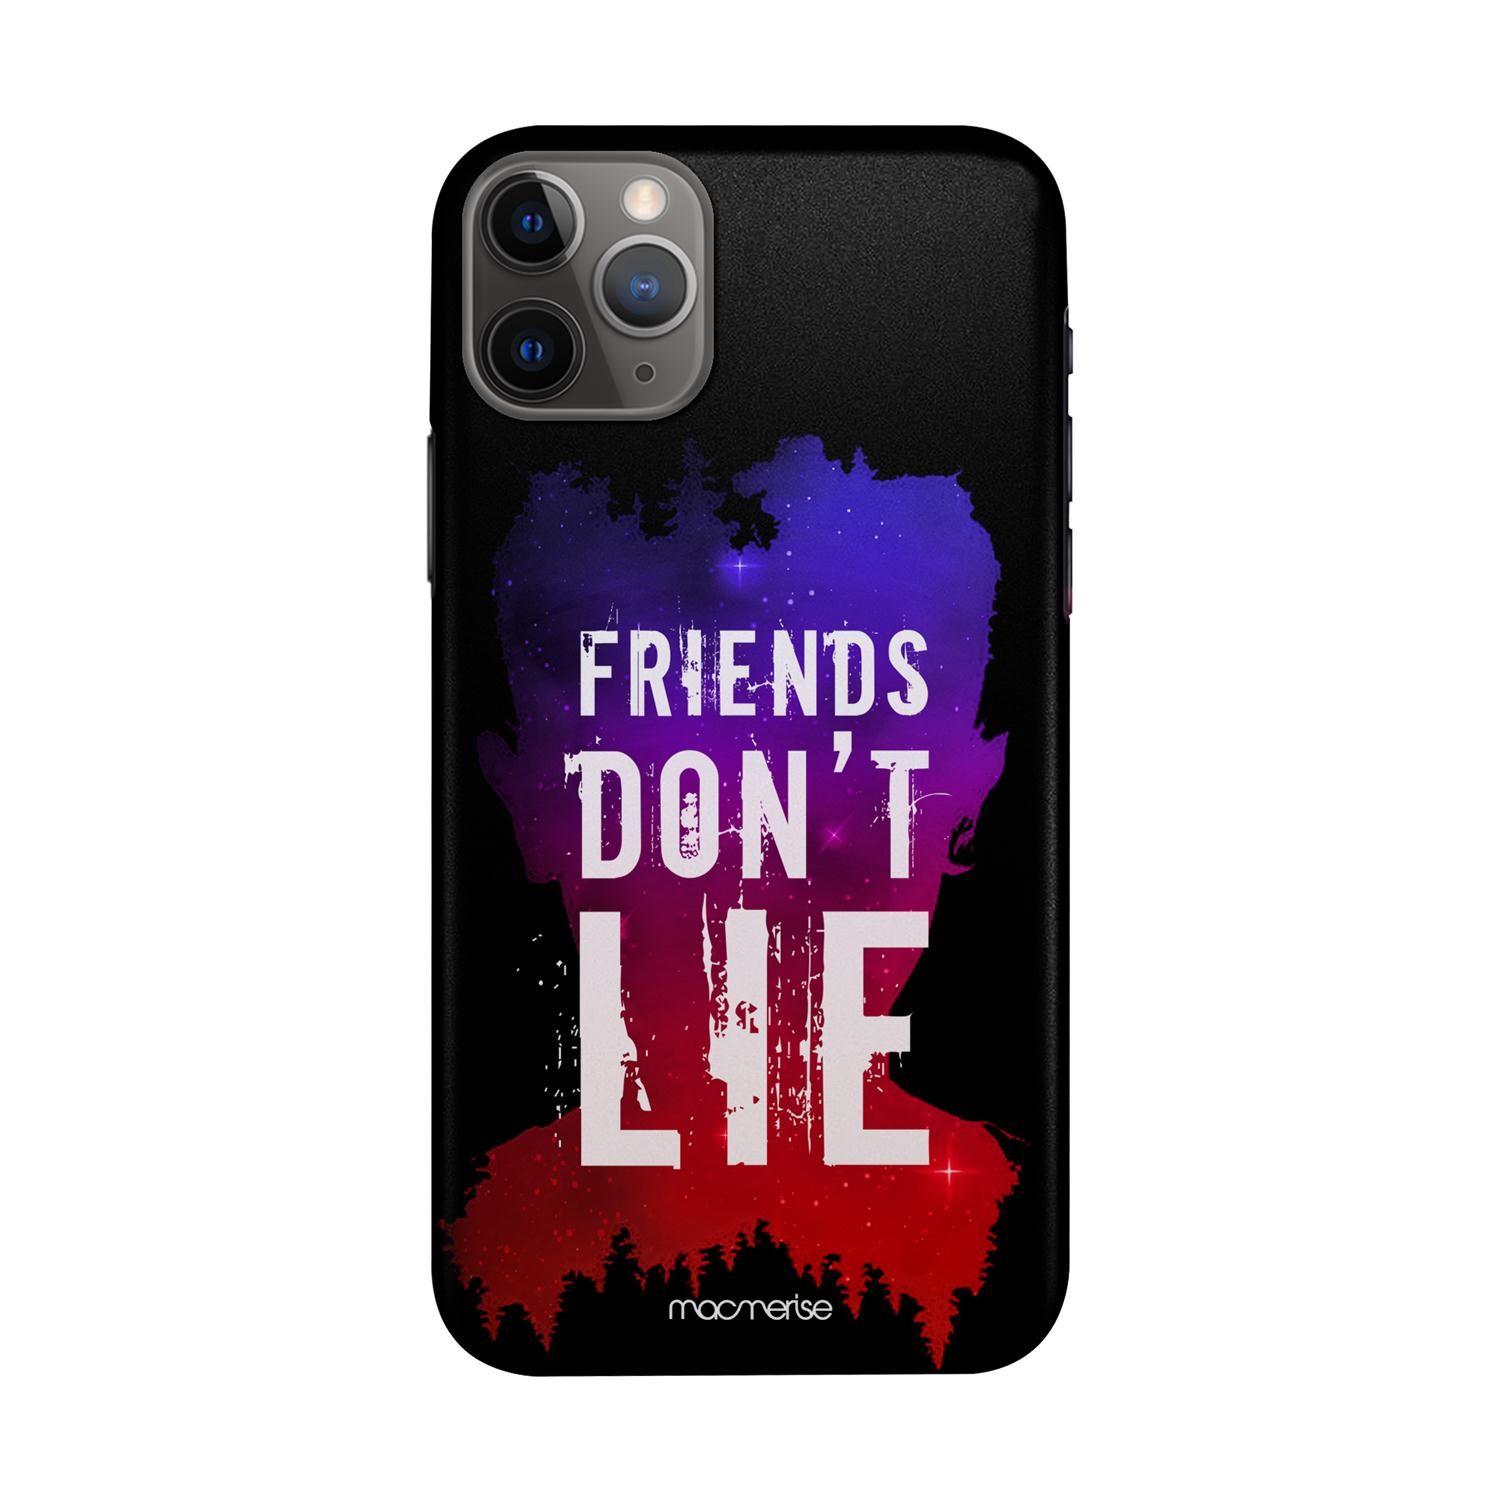 Buy Friends Dont Lie - Sleek Phone Case for iPhone 11 Pro Max Online